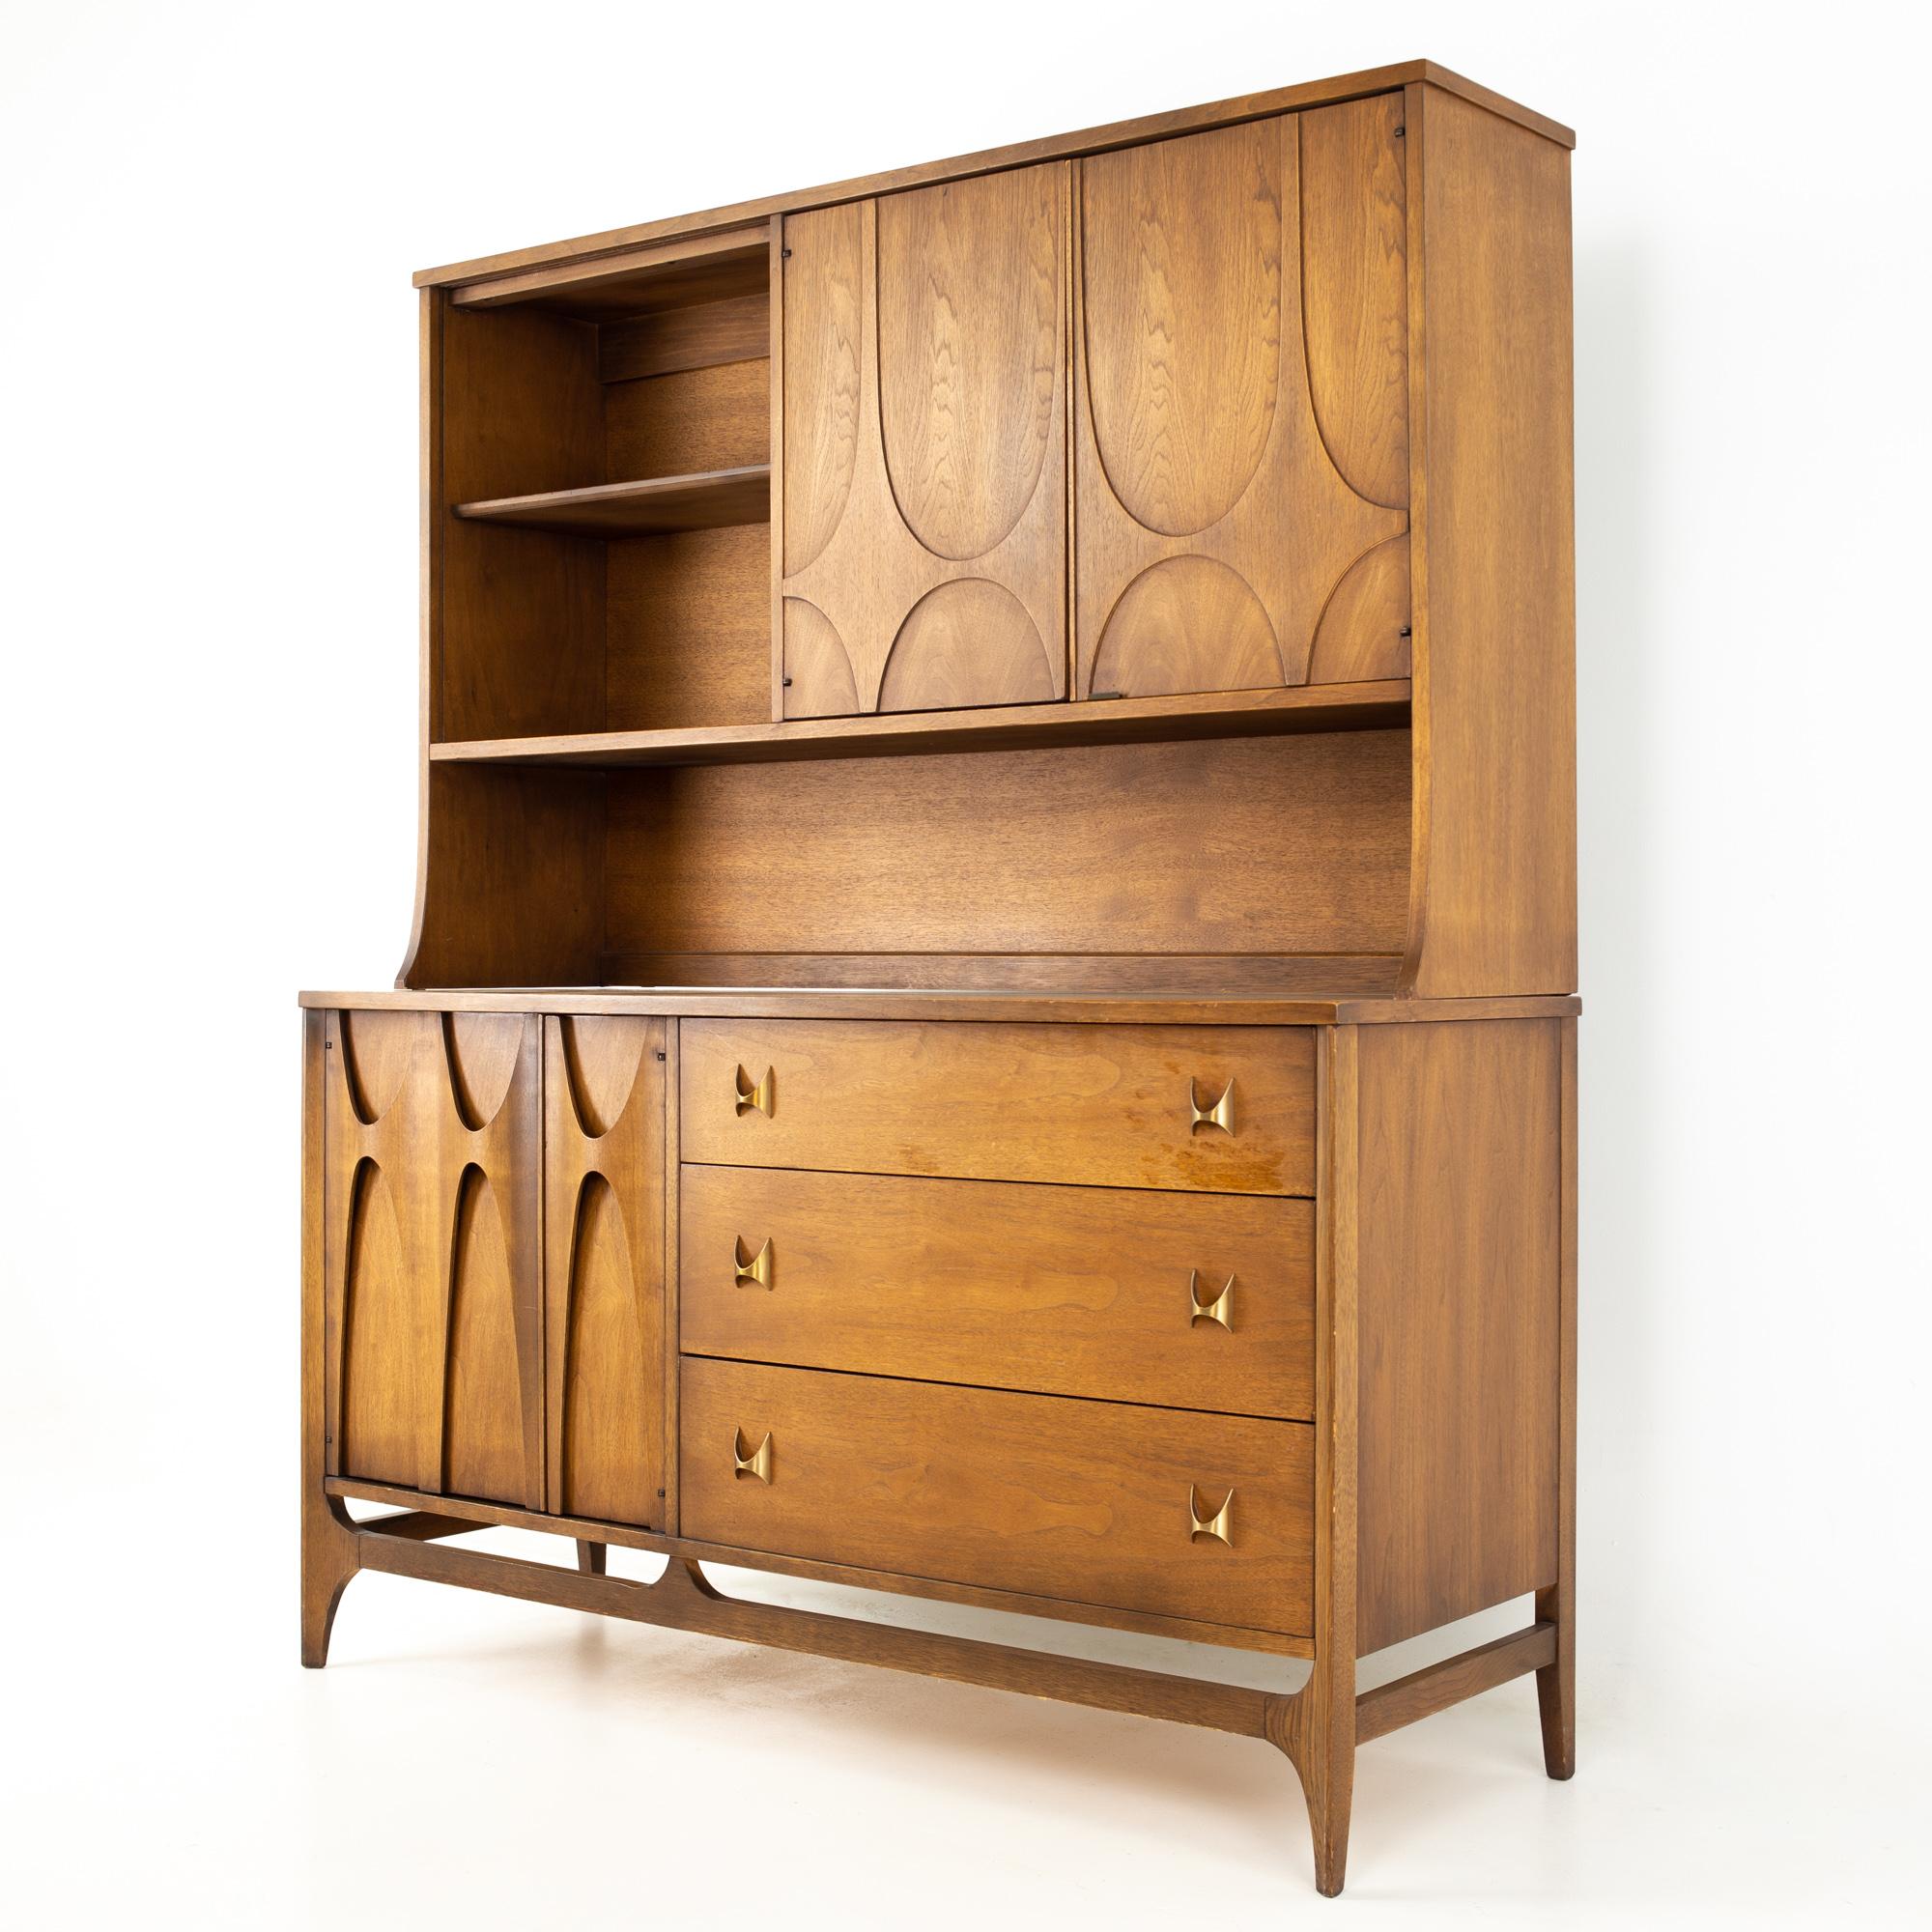 Broyhill Brasilia Brutalist midcentury walnut sideboard credenza buffet and hutch
Buffet and hutch measures: 54 wide x 19 deep x 65 inches high

All pieces of furniture can be had in what we call restored vintage condition. That means the piece